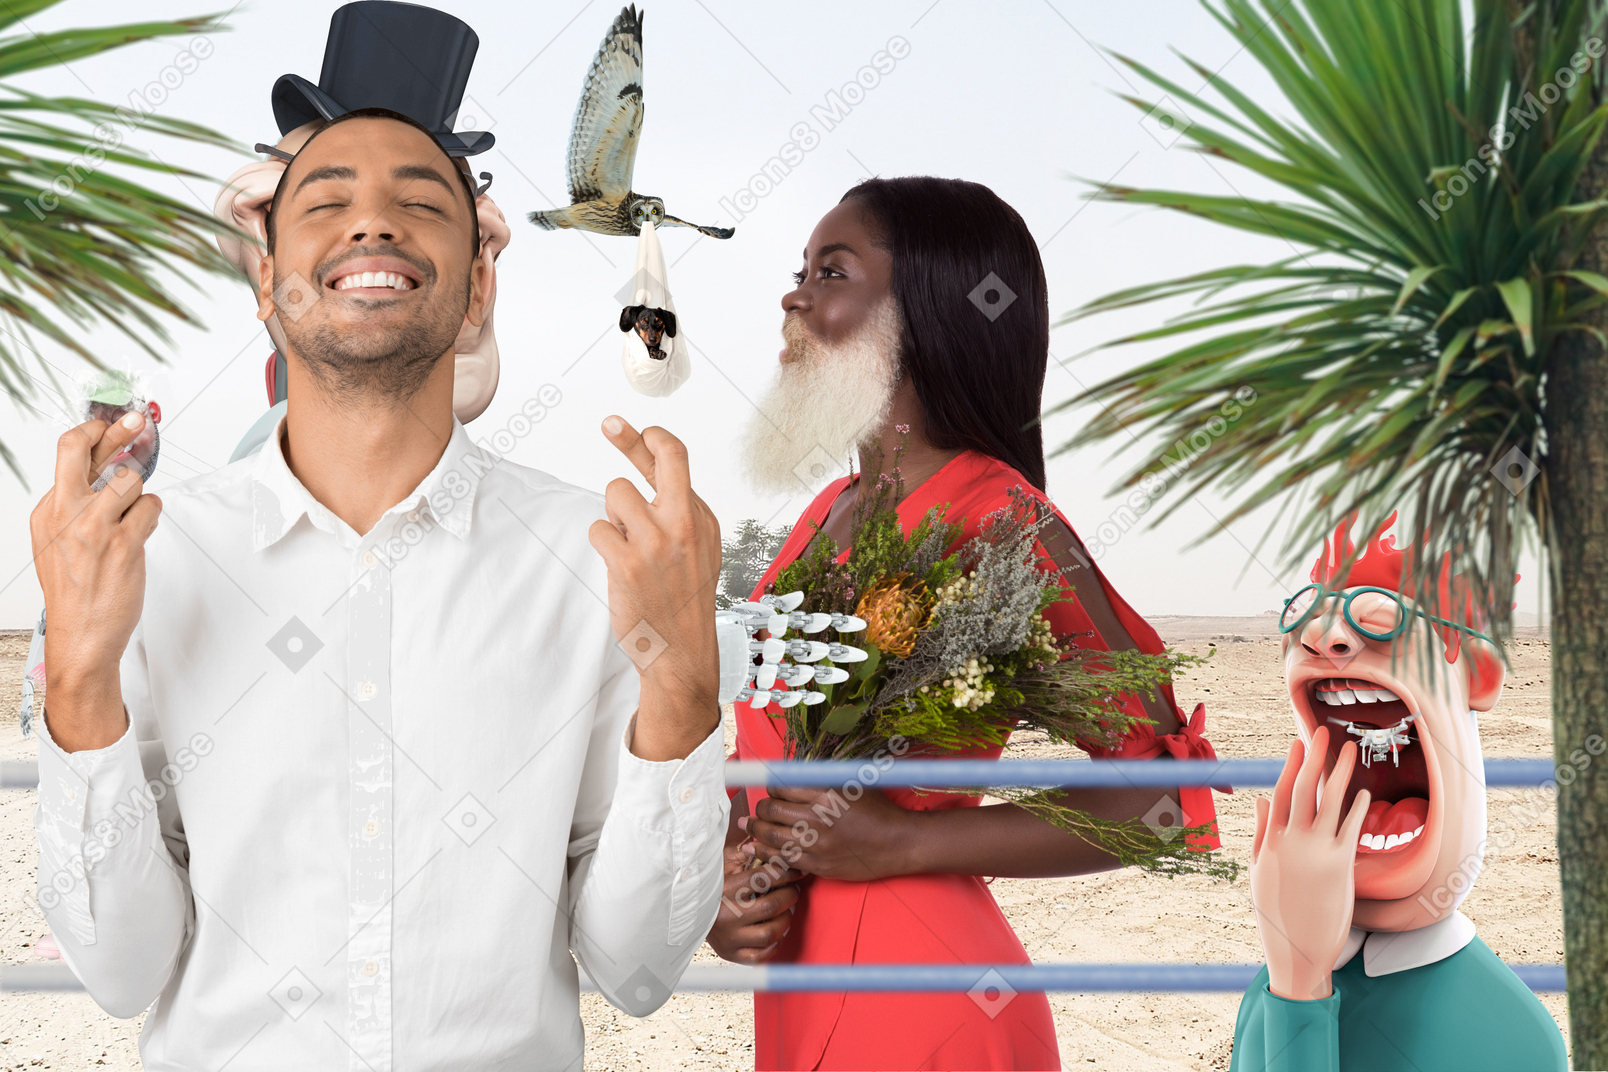 A man and a woman standing in front of a palm tree